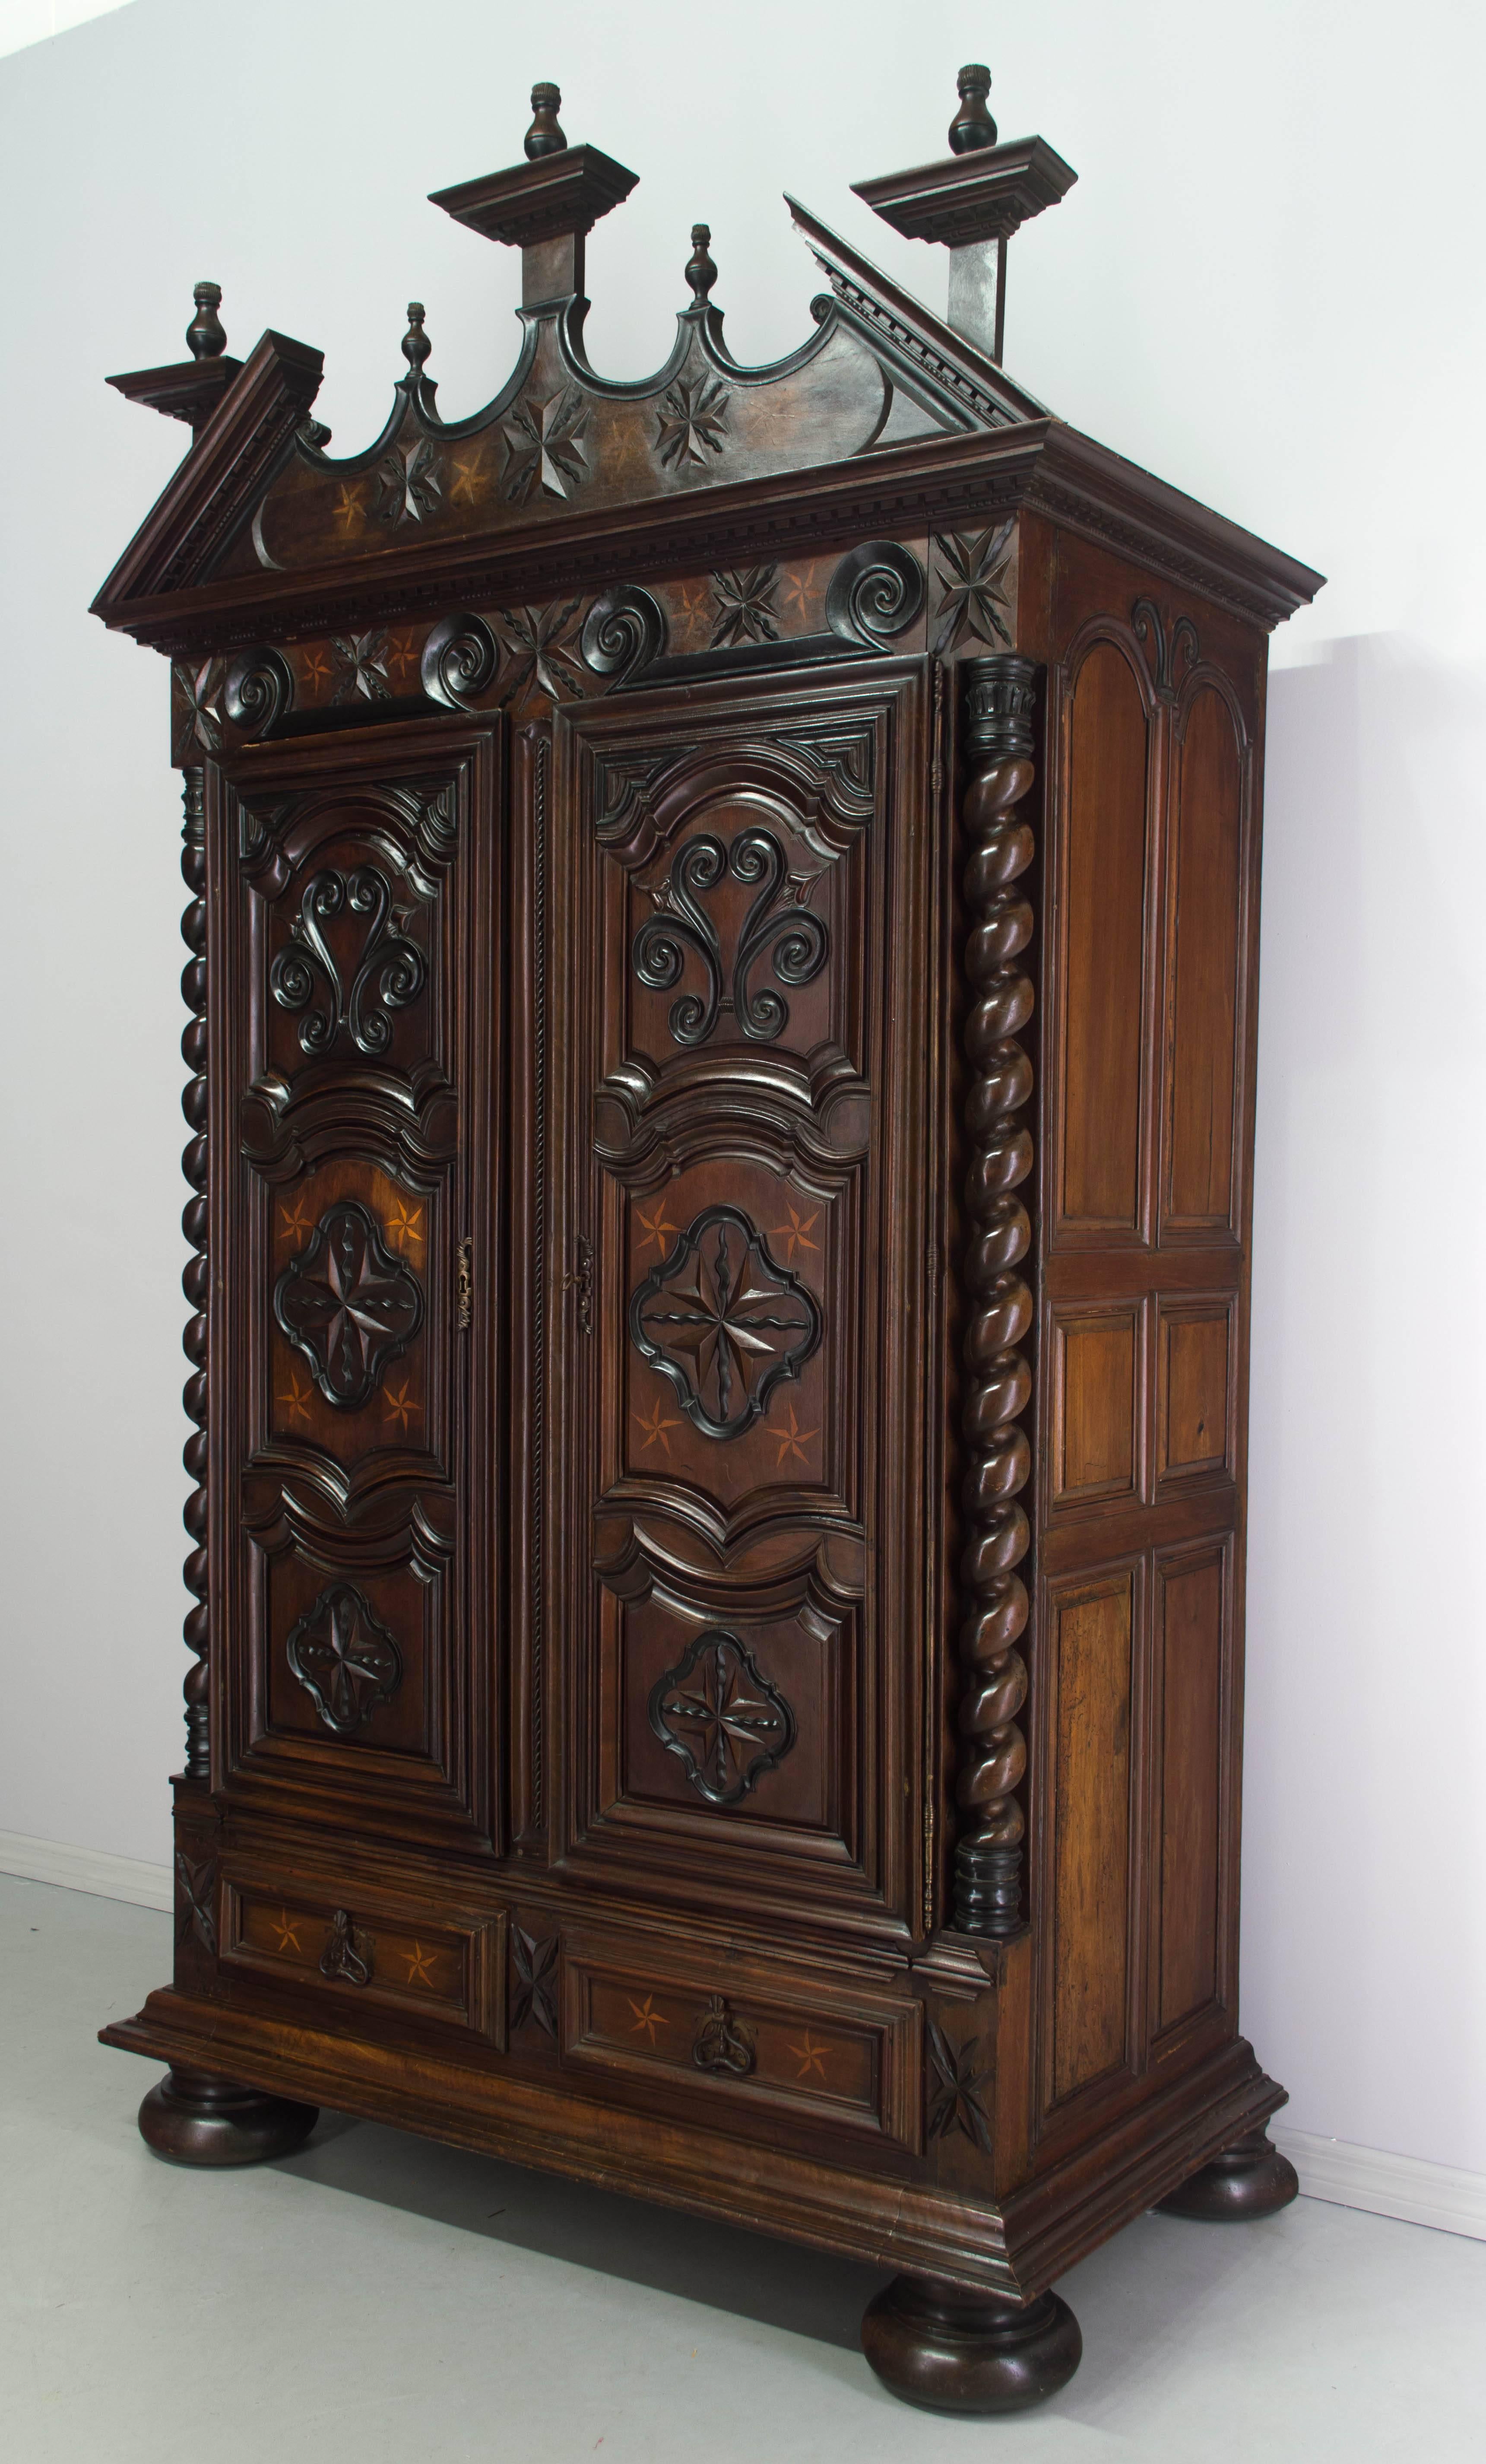 An exceptional Louis XIII style armoire from a chateau in the Southwest of France near the town of Agen. Made of exotic woods including ebony, rosewood, lemon and walnut. Magnificent hand-turned twisted columns. Raised panel doors with inlaid